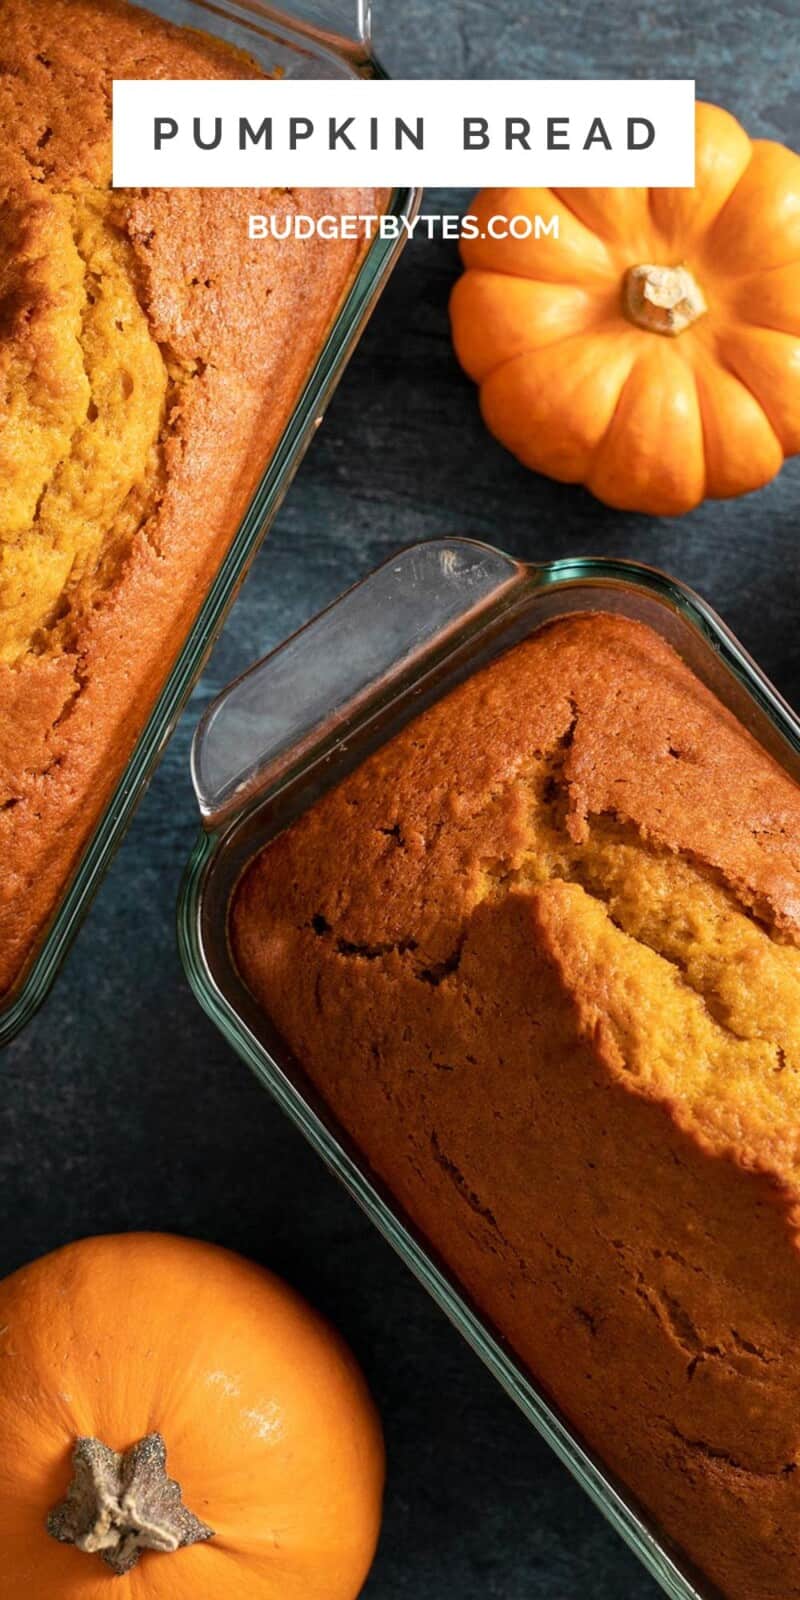 Overhead shot of pumpkin bread in a loaf pan with two mini pumpkins next to it on a dark background.